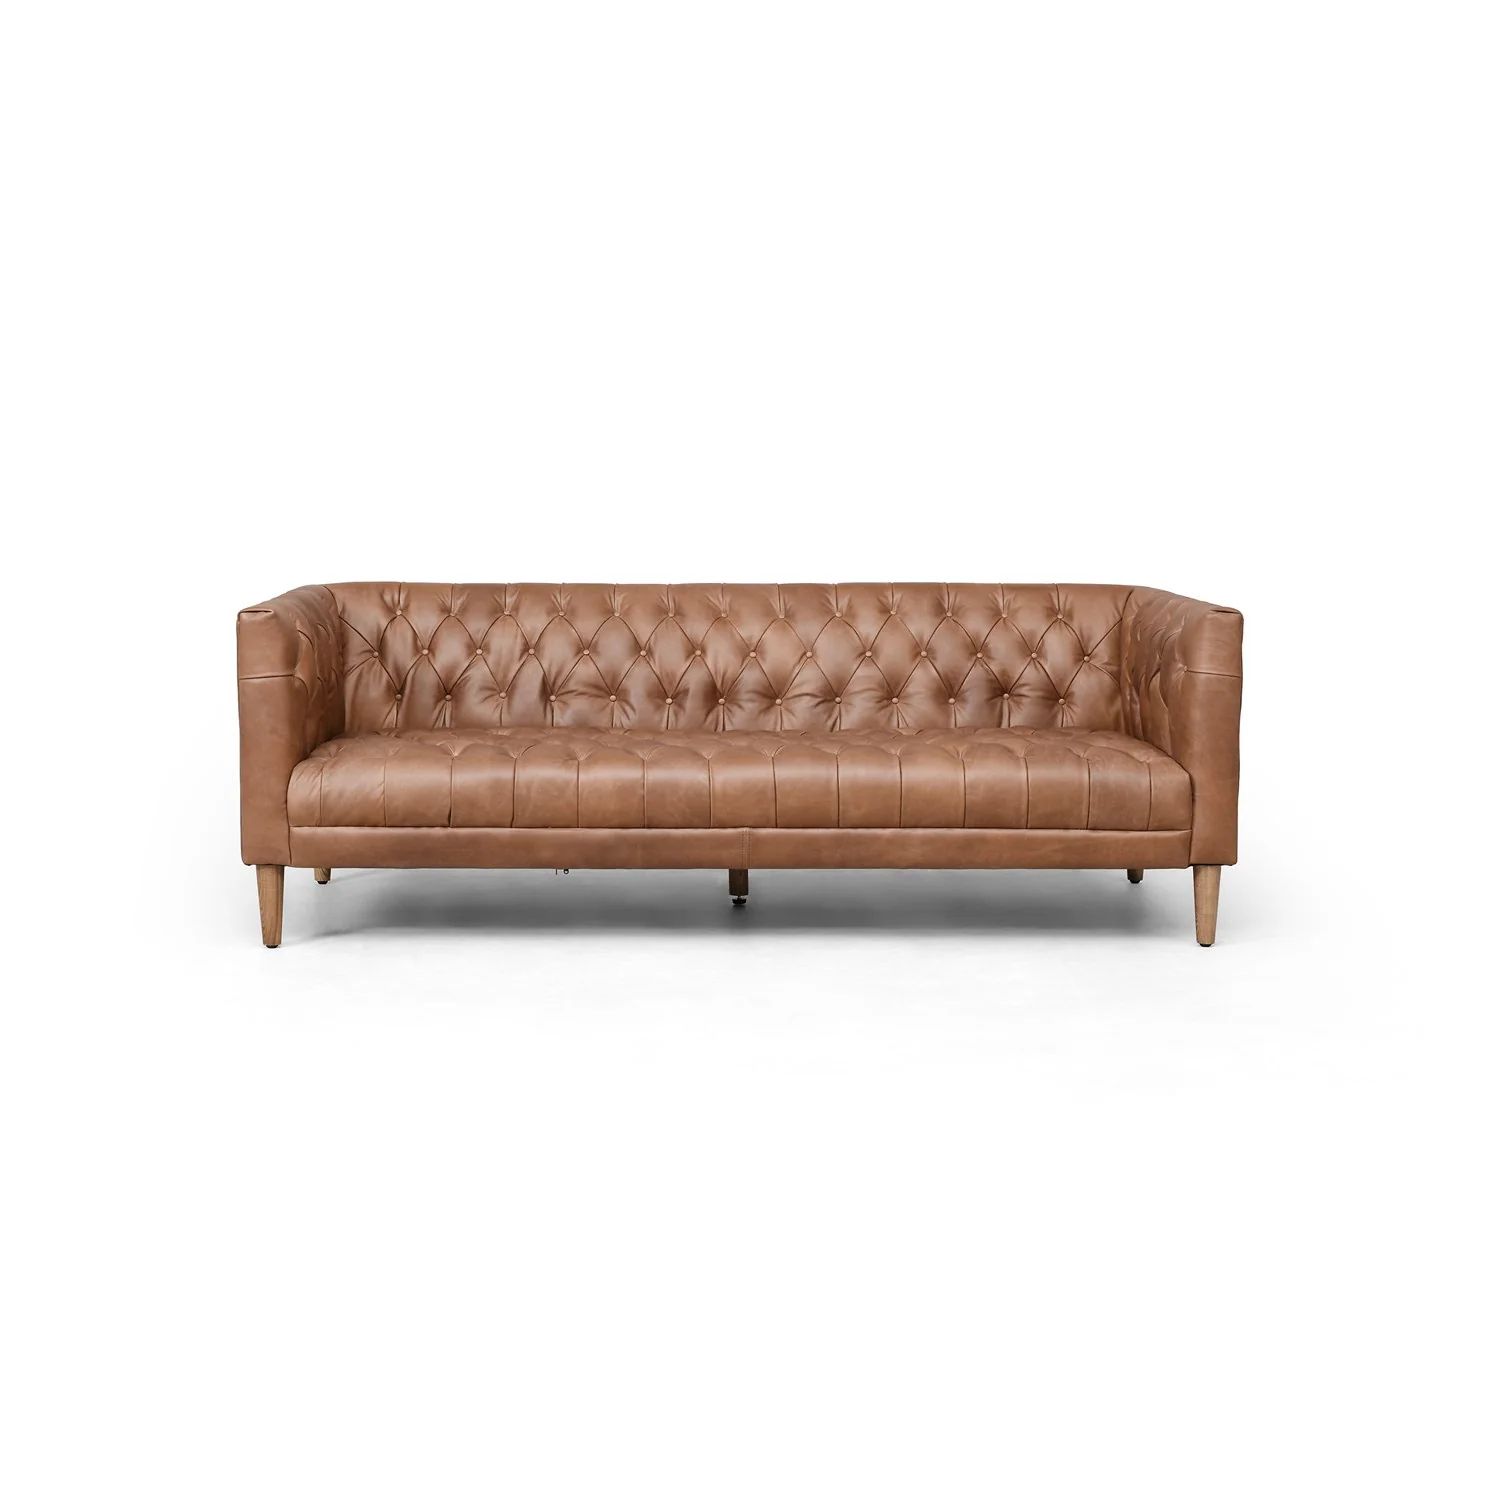 Williams Leather Sofa in Natural Washed Chocolate | Burke Decor